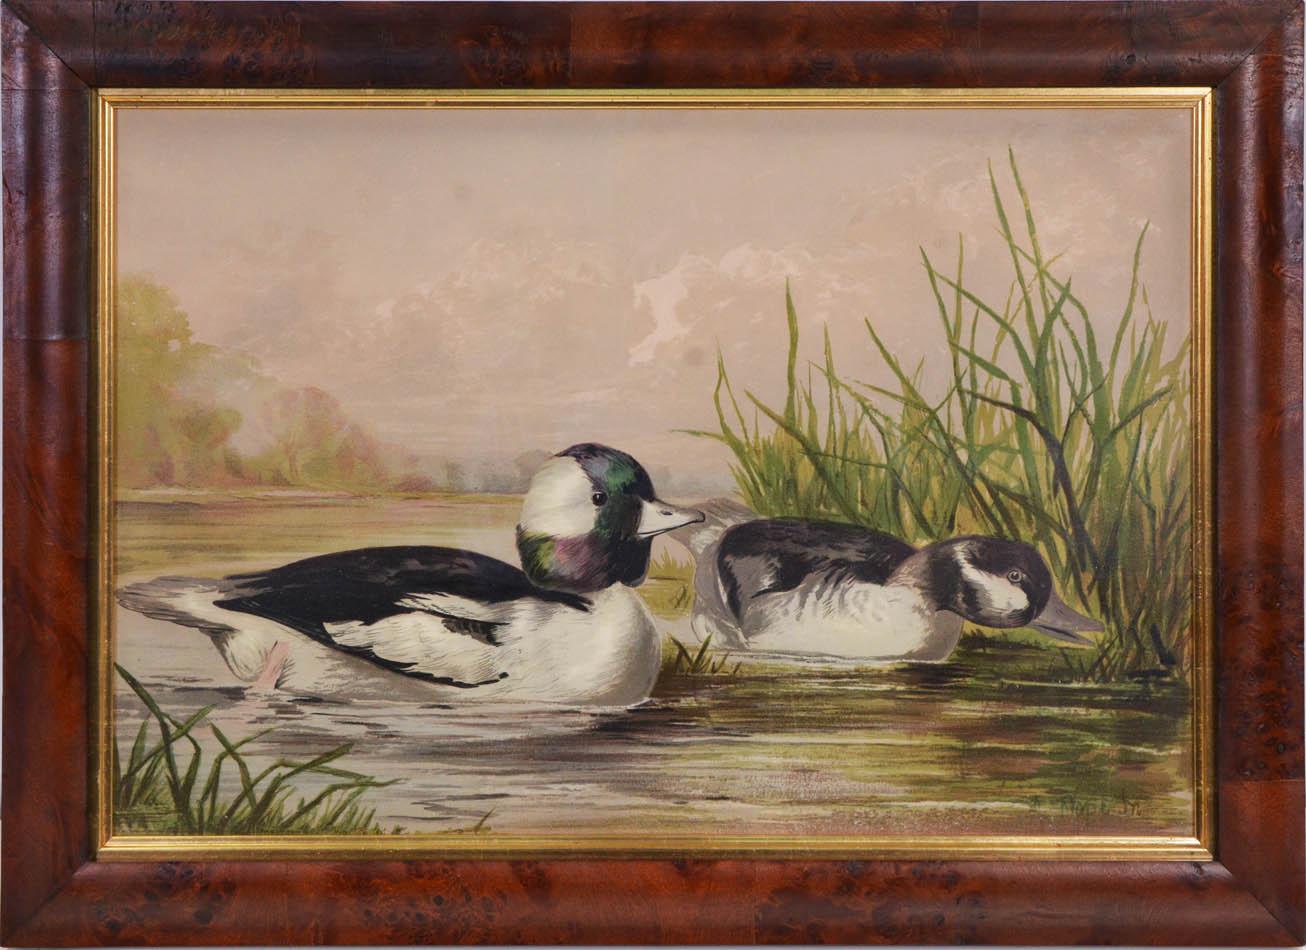 Group of Six Water Fowl - Naturalistic Print by Alexander Pope Jr.